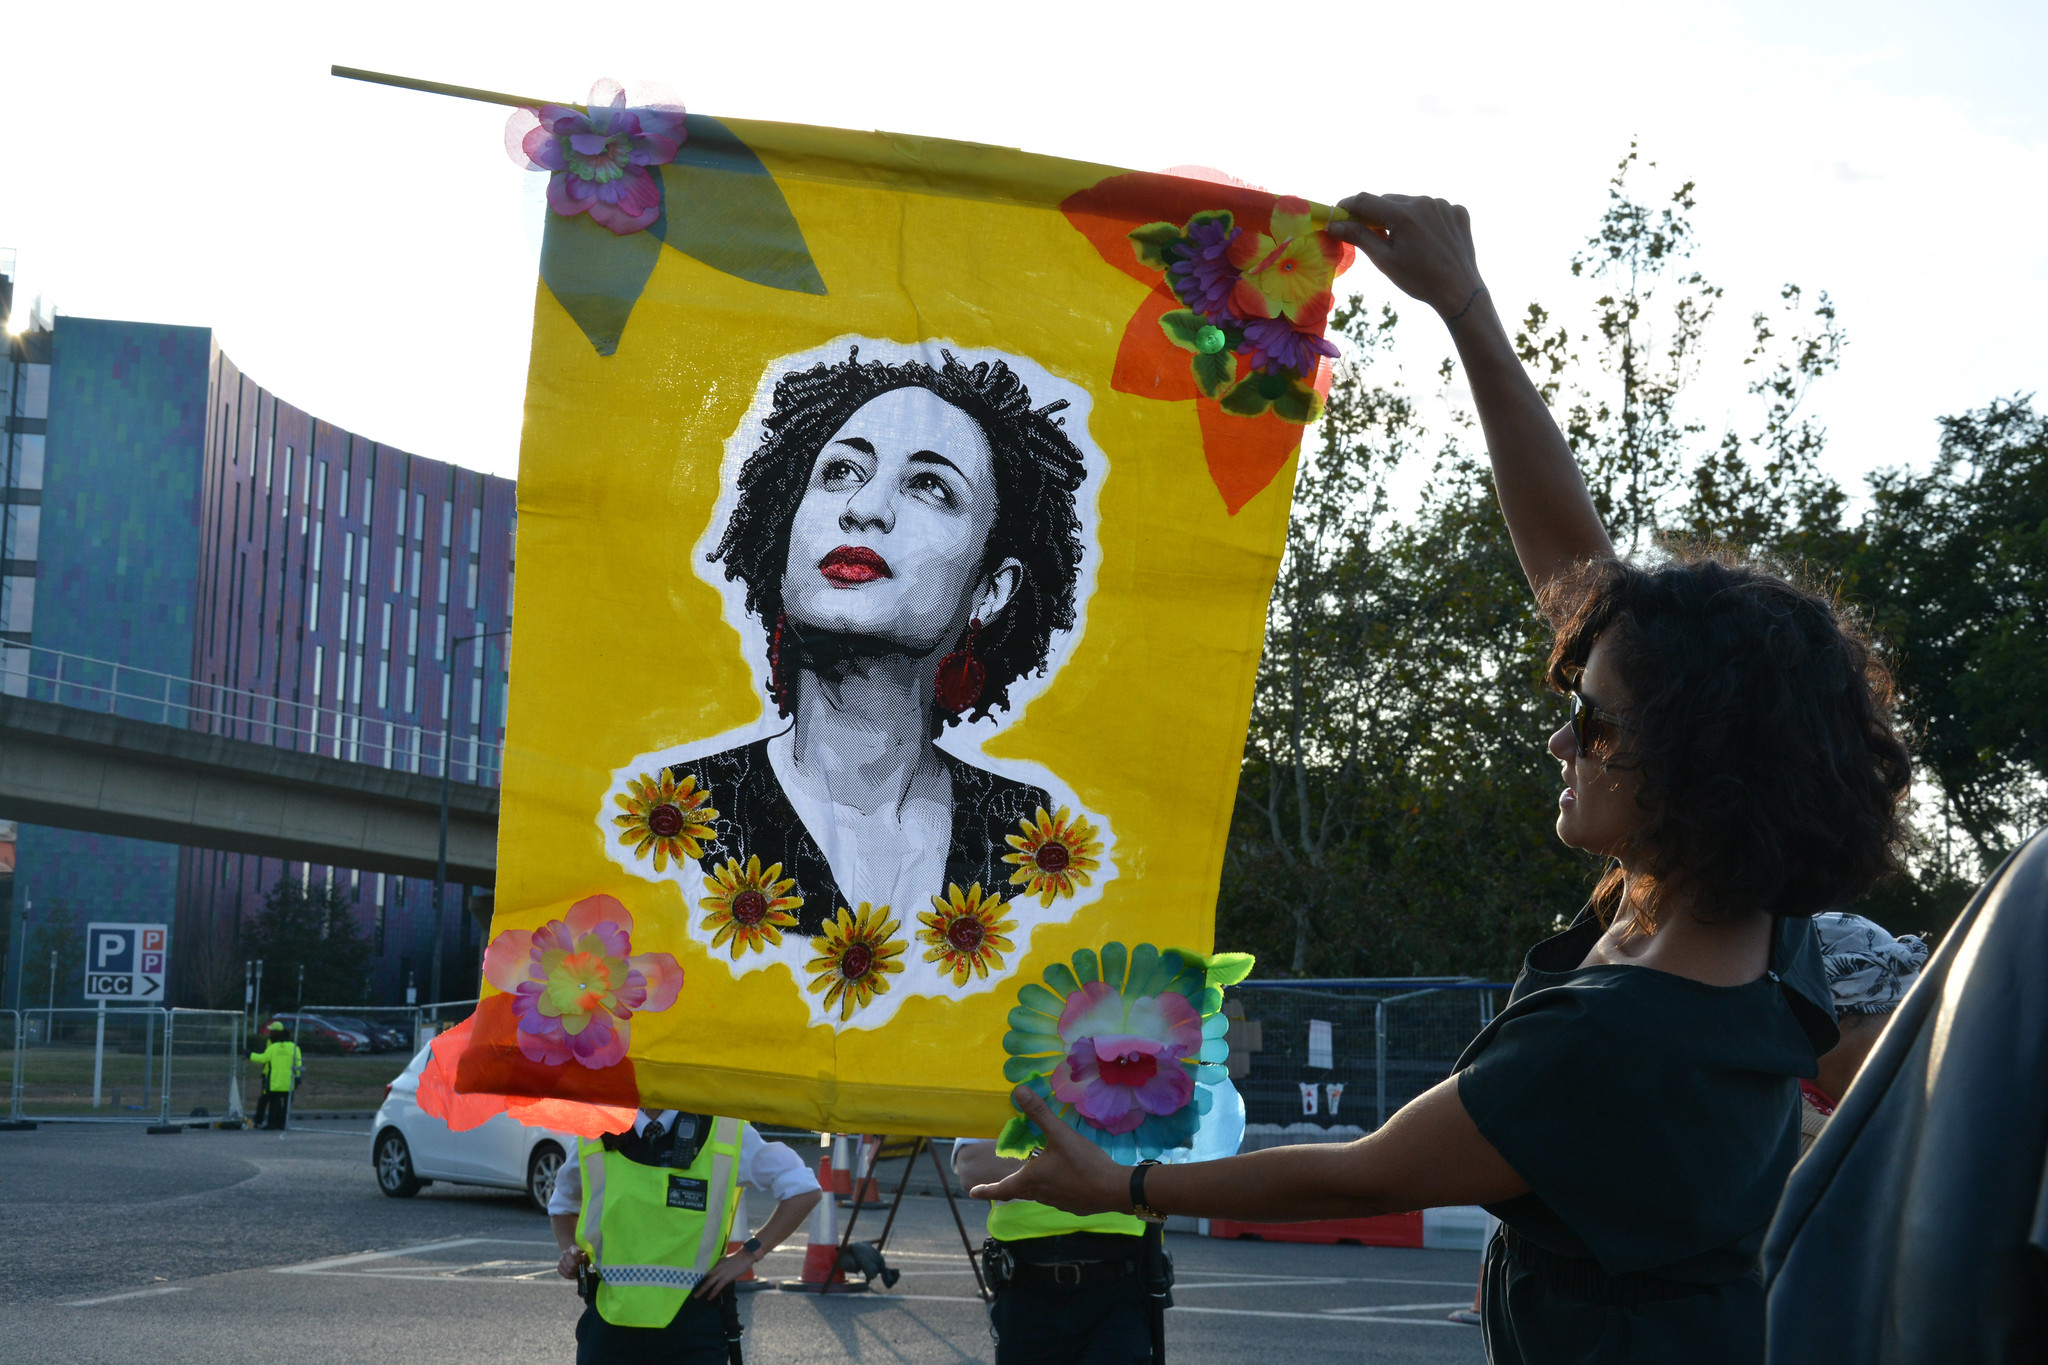 Activist holding up image of a person wearing red lipstick and sunflowers on a yellow background